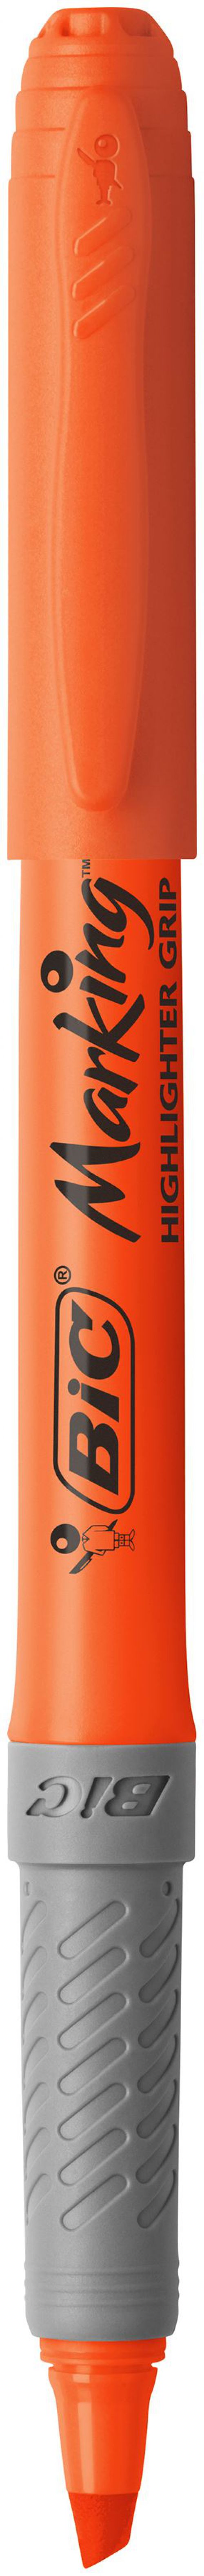 54244BC | BIC Highlighter Grip is a comfortable highlighter that is easy to use, as the textured rubber grip fits neatly in your hand. The water-based ink is fluorescent and available in orange. The chisel tip highlights at a width of between 1.6mm and 3.4mm, and it will not dry out if the cap is left off for up to 8 hours. It is a great choice for your home, school or office stationery.